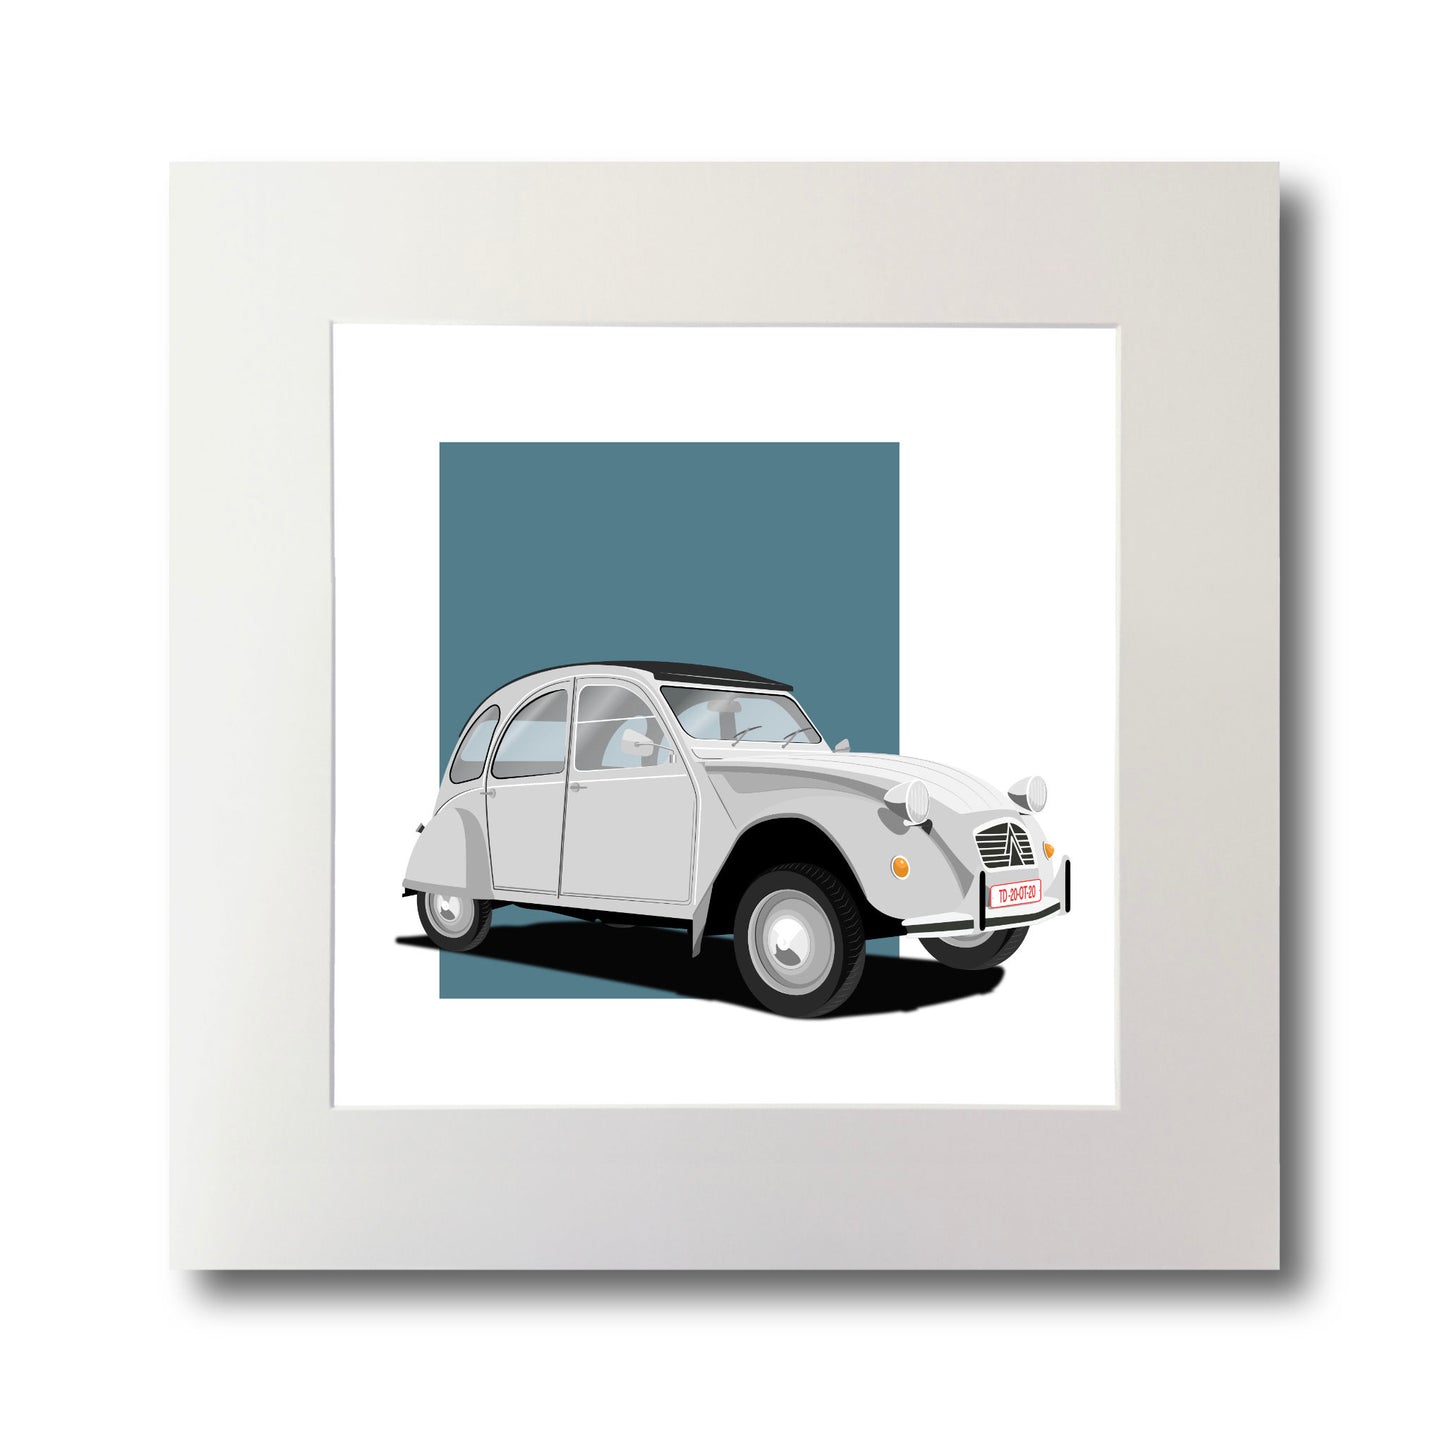 Illustration of a white Citroën 2CV, mounted and measuring 30 by 30 cm